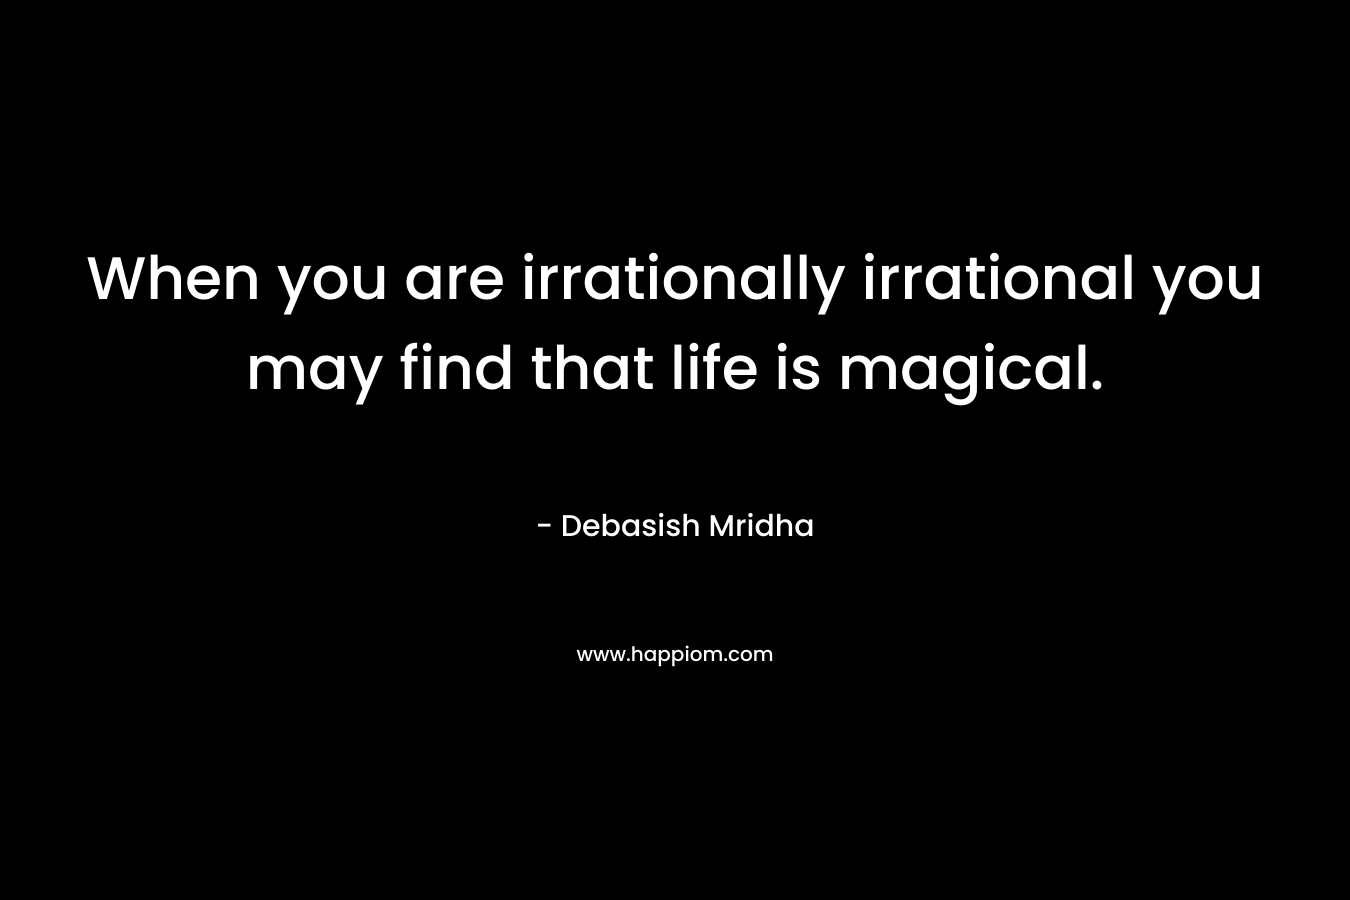 When you are irrationally irrational you may find that life is magical.